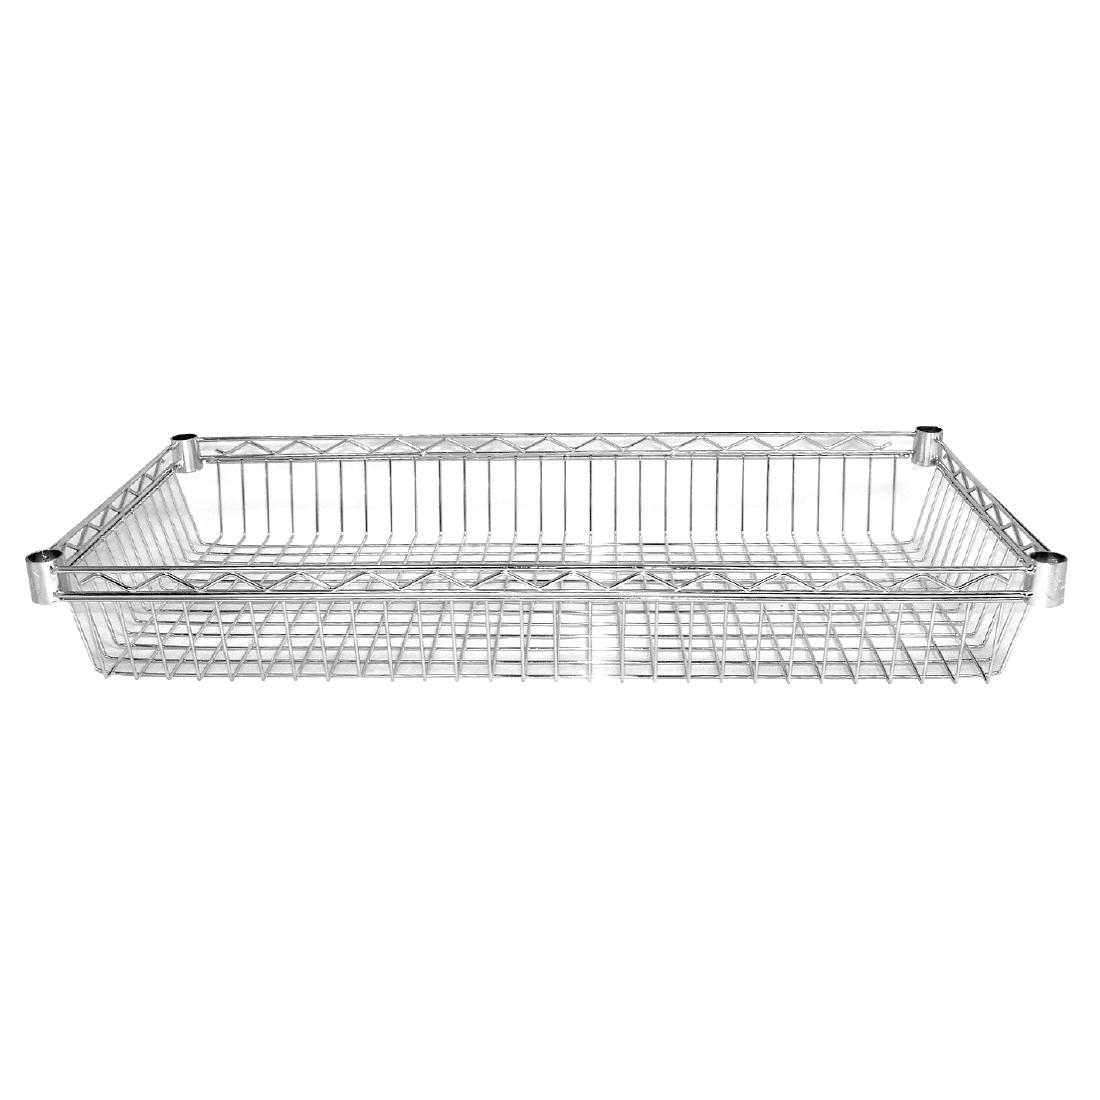 Vogue Chrome Baskets 915mm Pack of 2